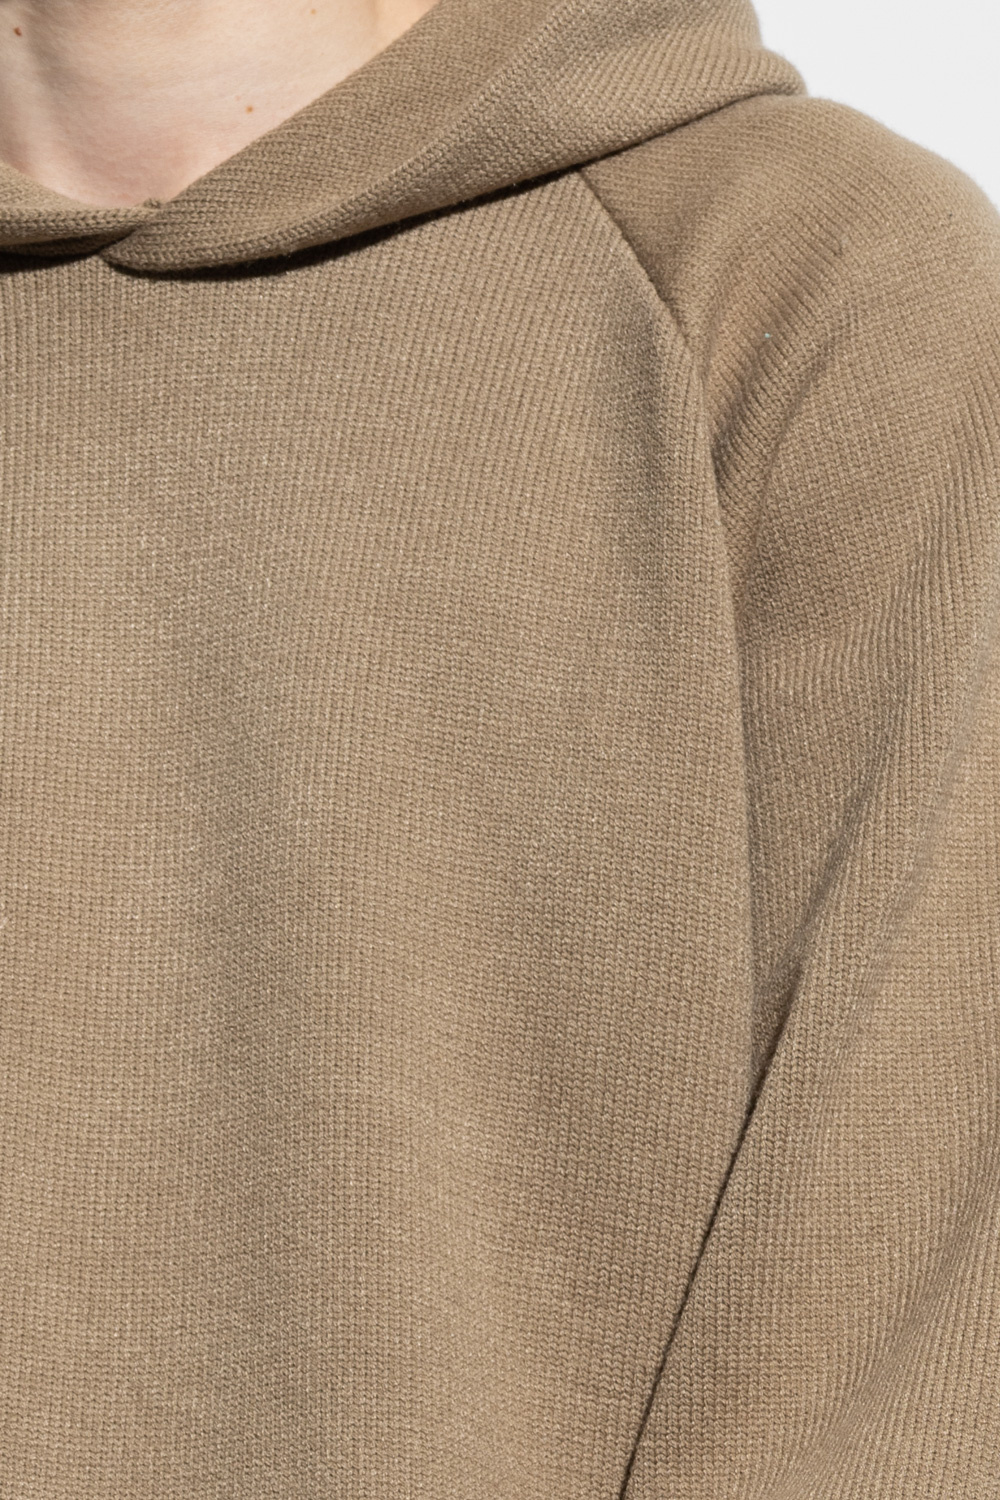 The Hannah T-shirt is crafted from black cotton - Brown clothing